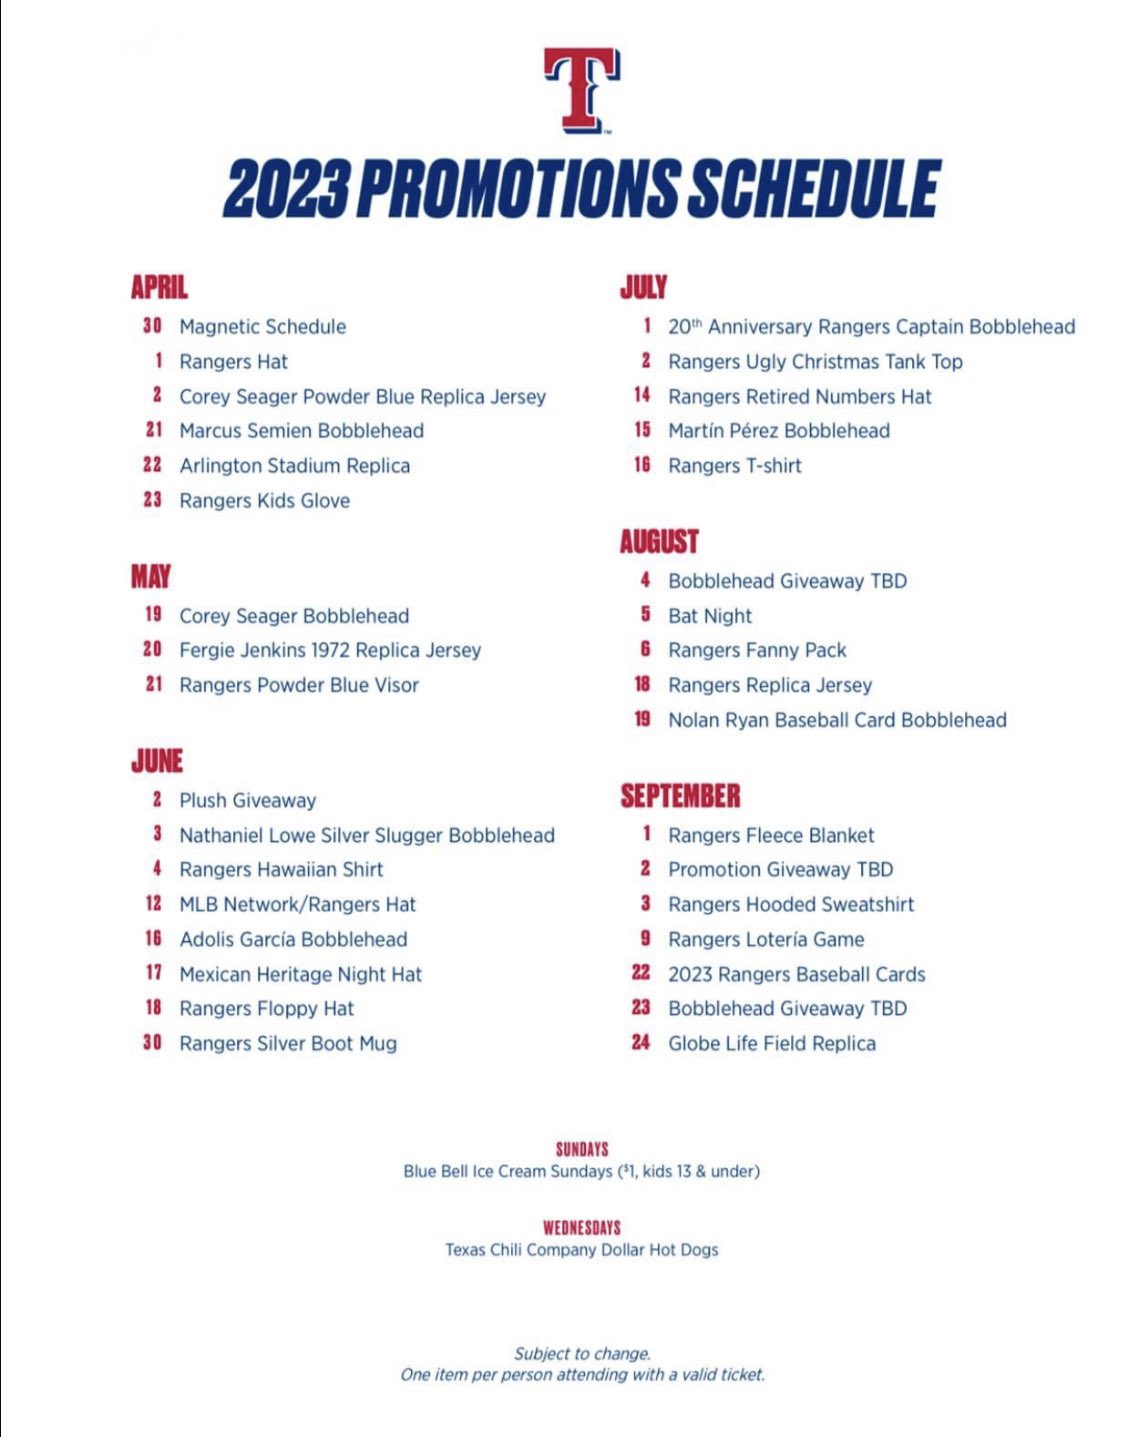 Rangers Nation on X: The #TexasRangers 2023 promotions schedule